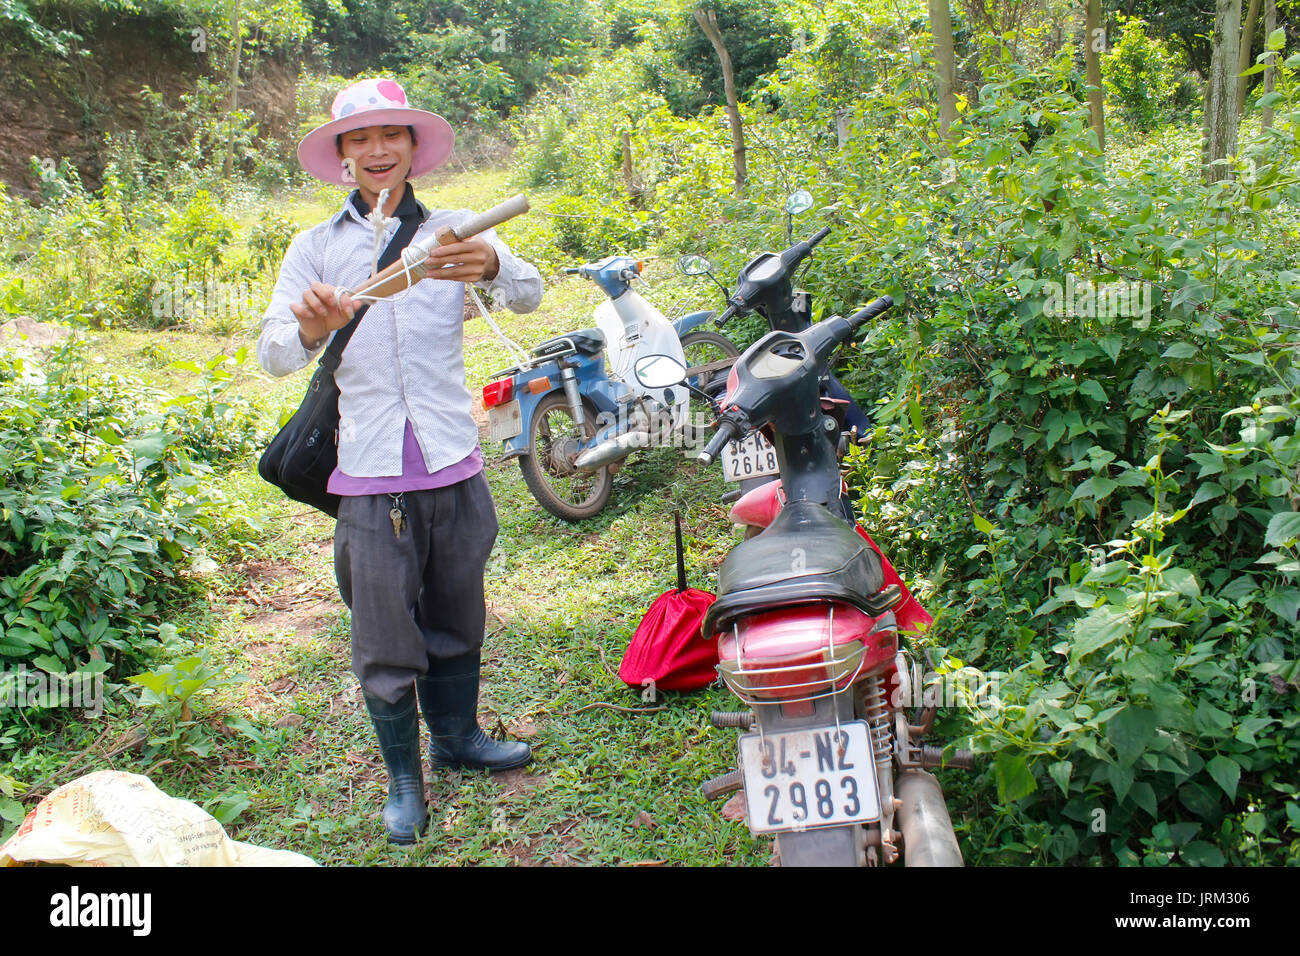 HAI DUONG, VIETNAM, May, 20: young man go trapping birds in the forest on May, 20, 2014 in Hai Duong, Vietnam. Stock Photo